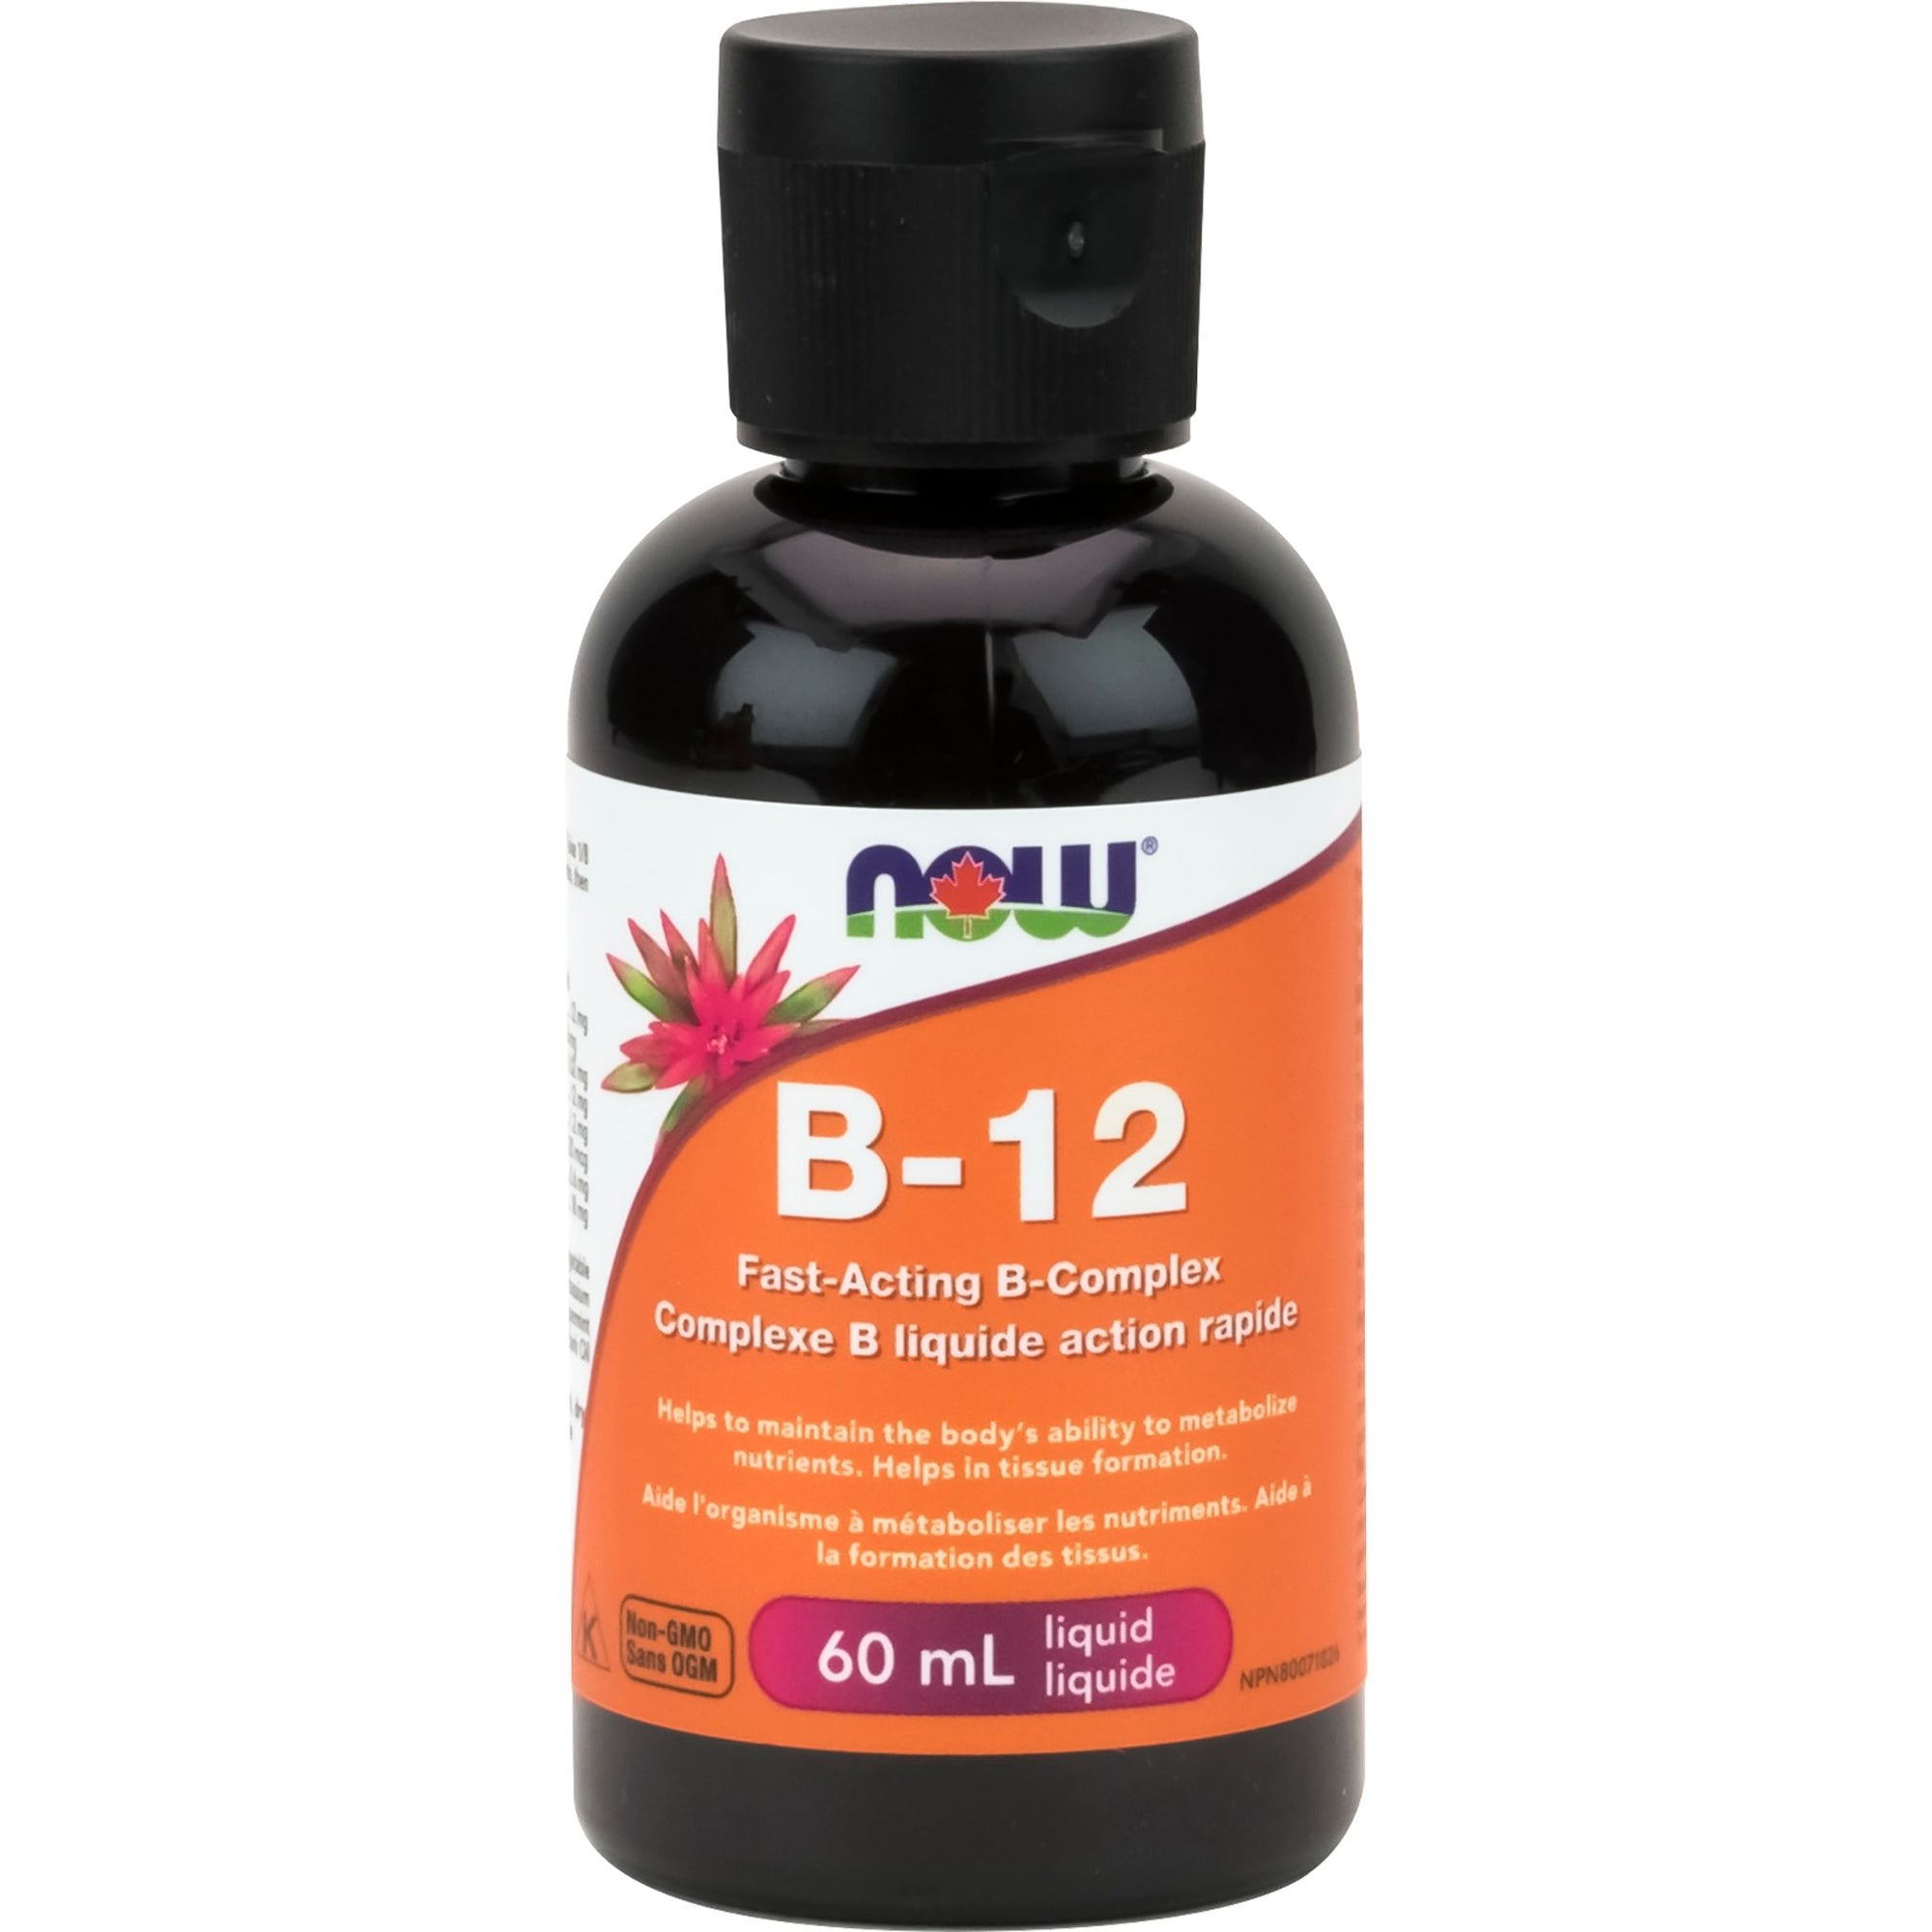 NOW B-12 Fast Acting B Complex Liquid 60ml bottle - Helps to maintain the body's ability to metabolize nutrients. Helps in tissue formation. 